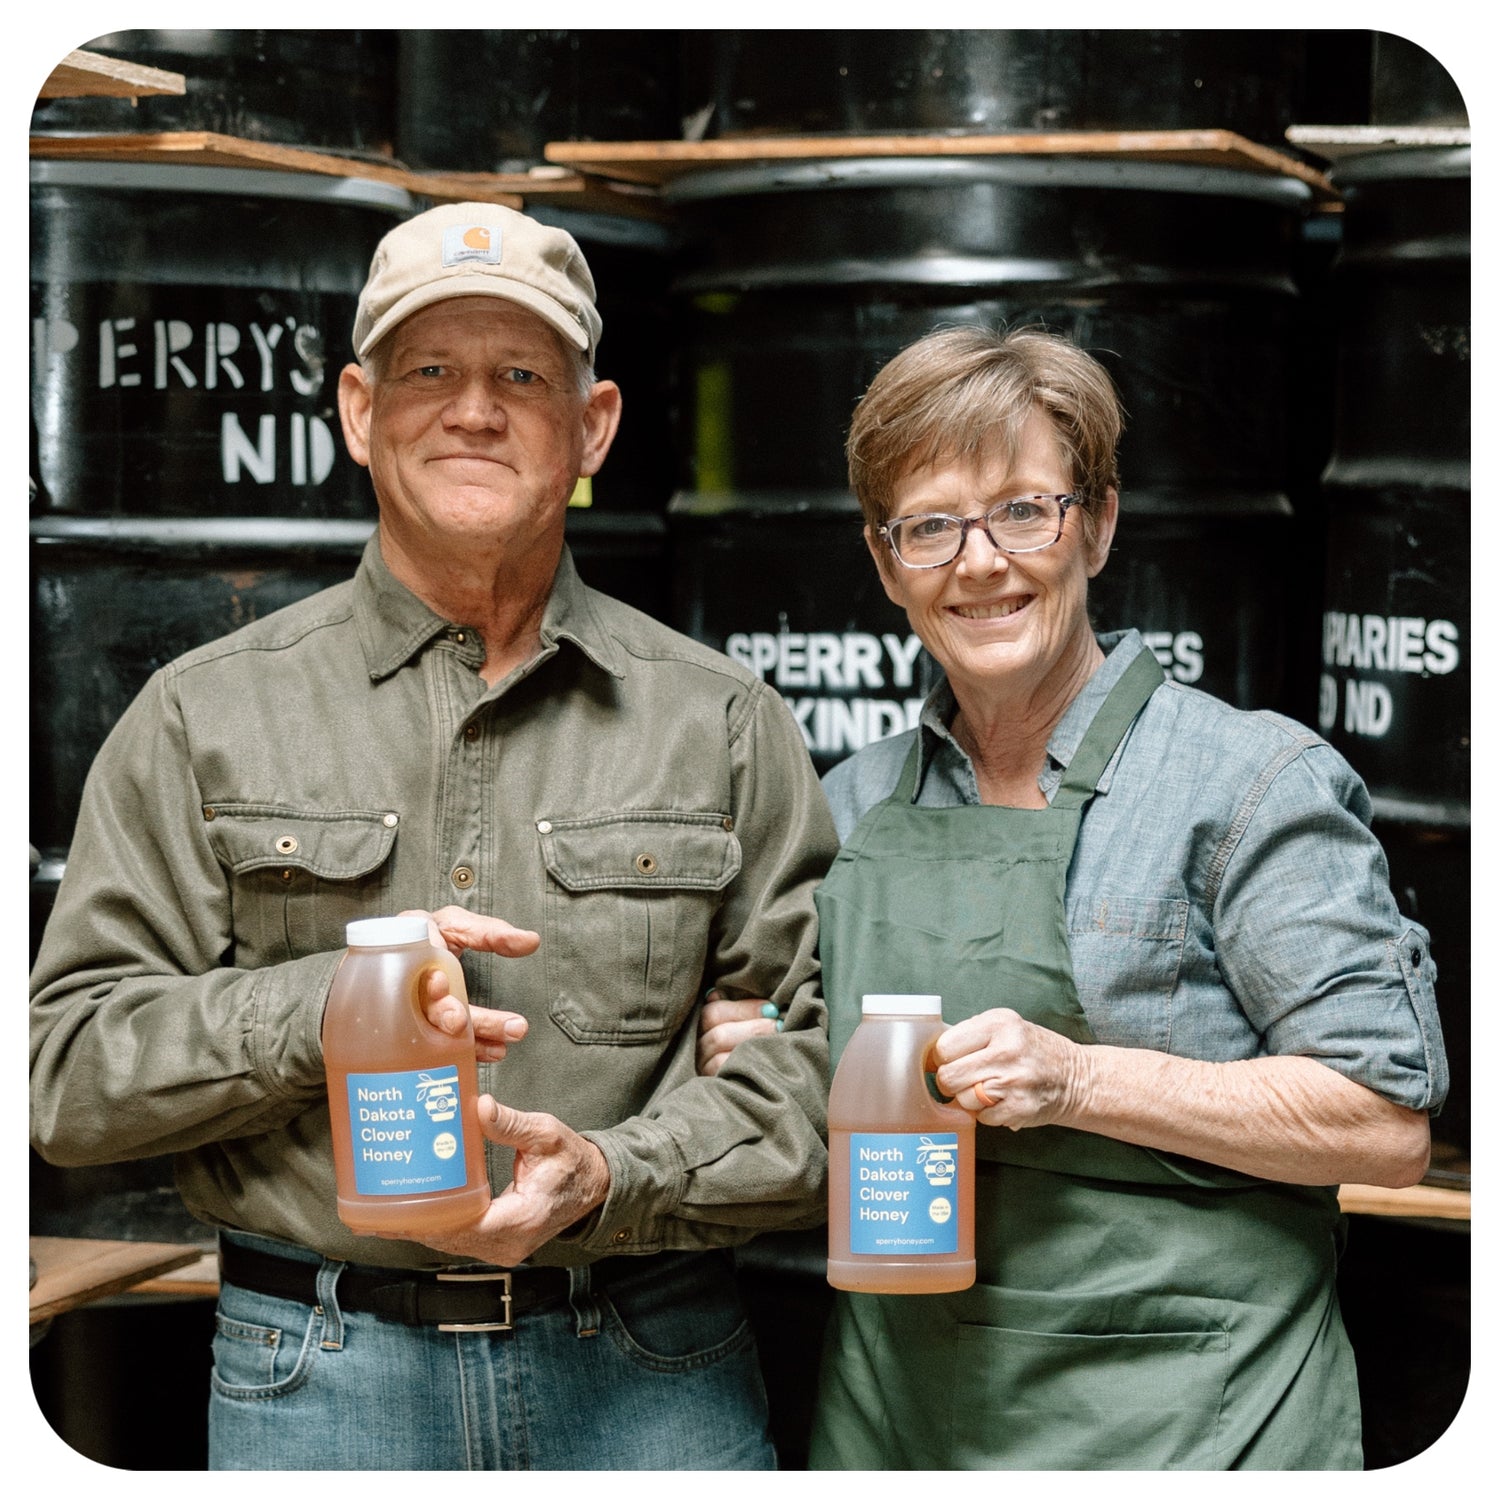 Mark and Becca Sperry holding jars of clover honey.